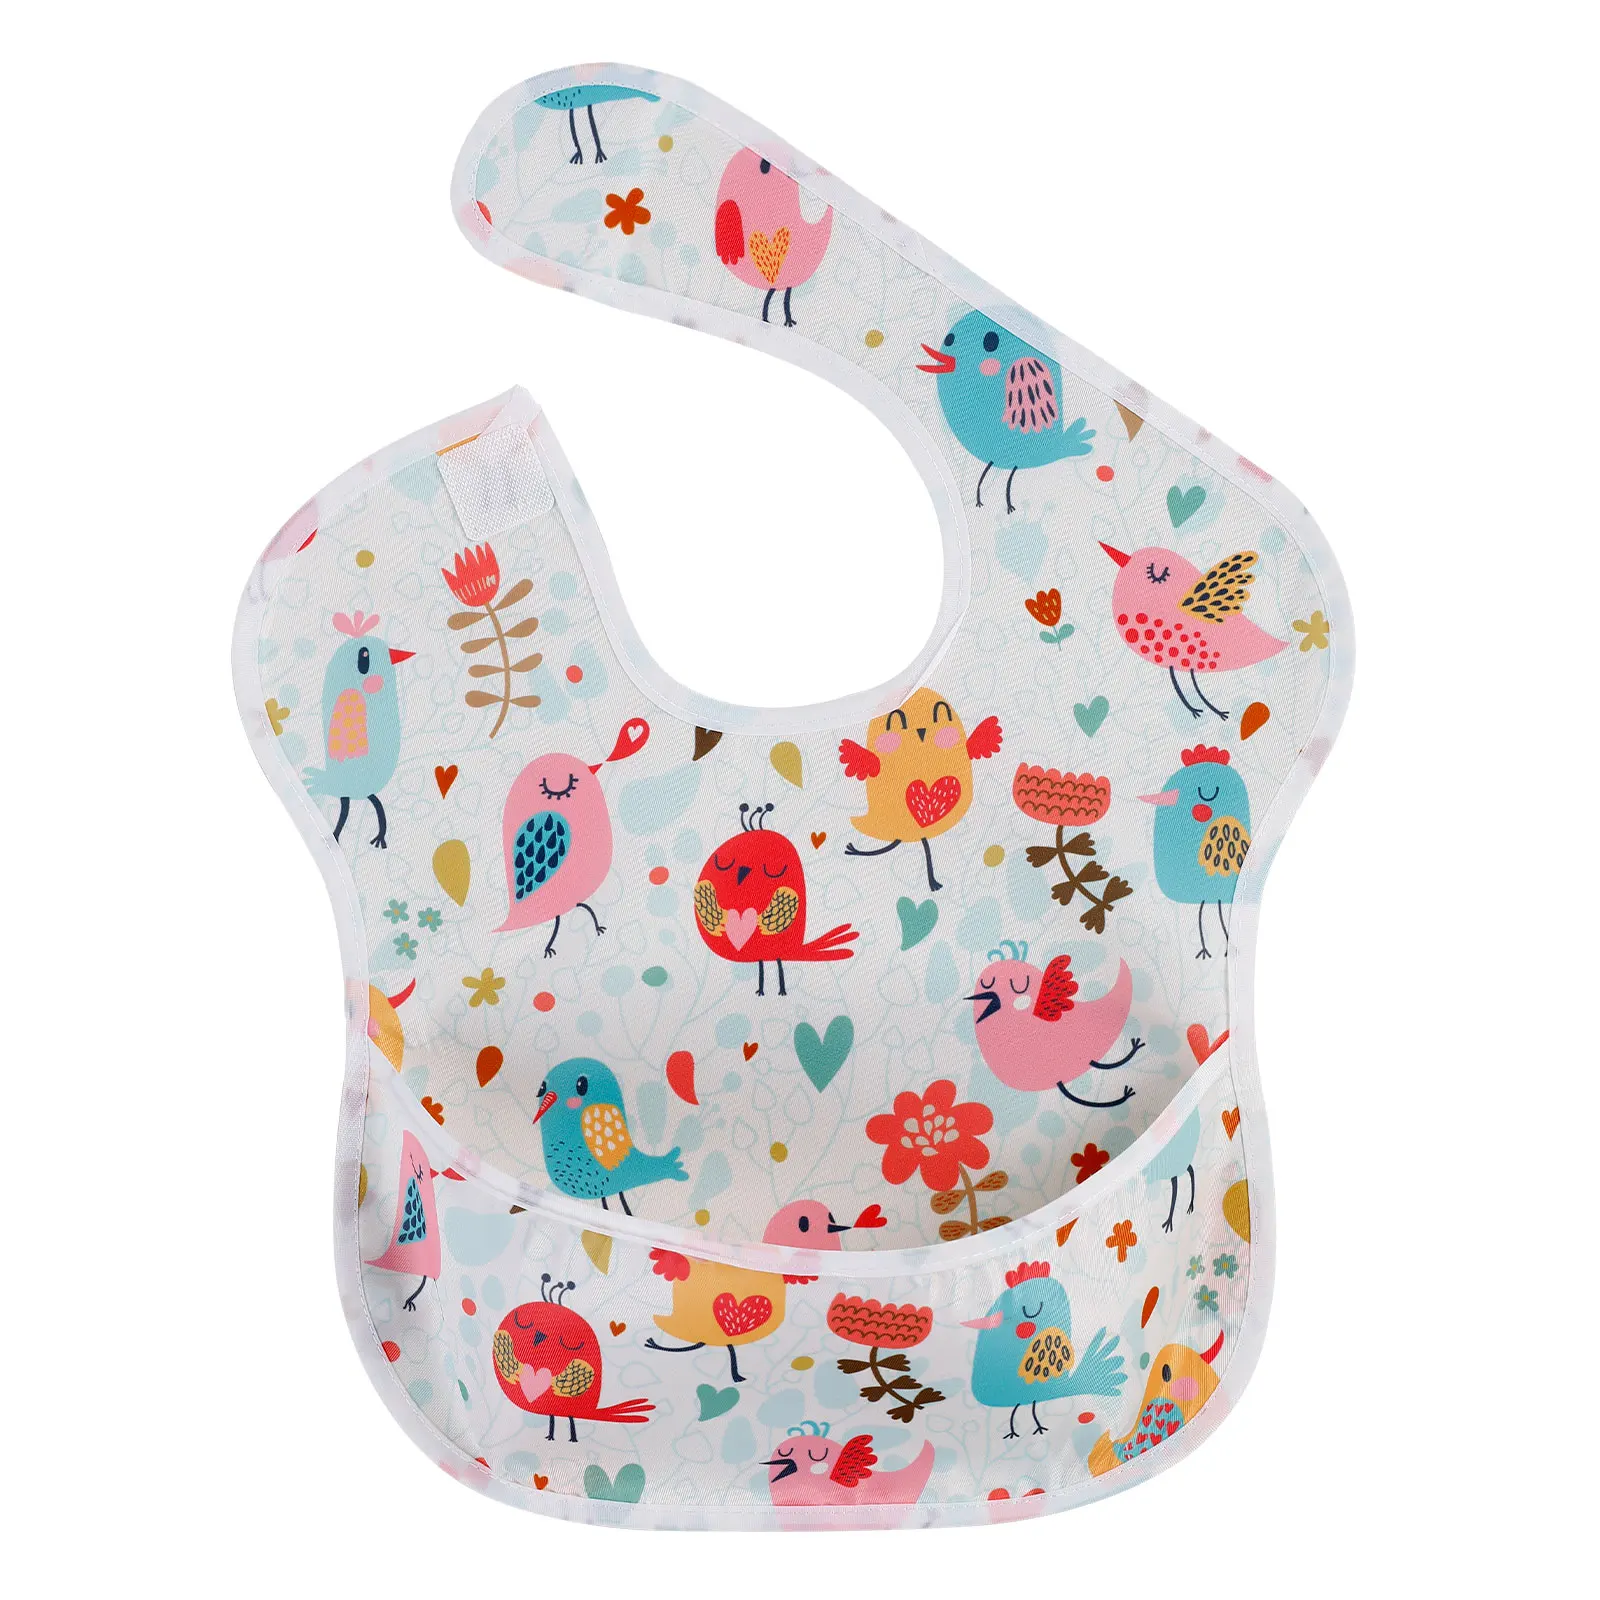 cheap baby accessories	 Waterproof Baby Bibs 100% Polyester TPU Coating Feeding Cloth Bibs Washable Cartoon Baby Bibs With Food Catcher for Babies Towel child safety seat Baby Accessories